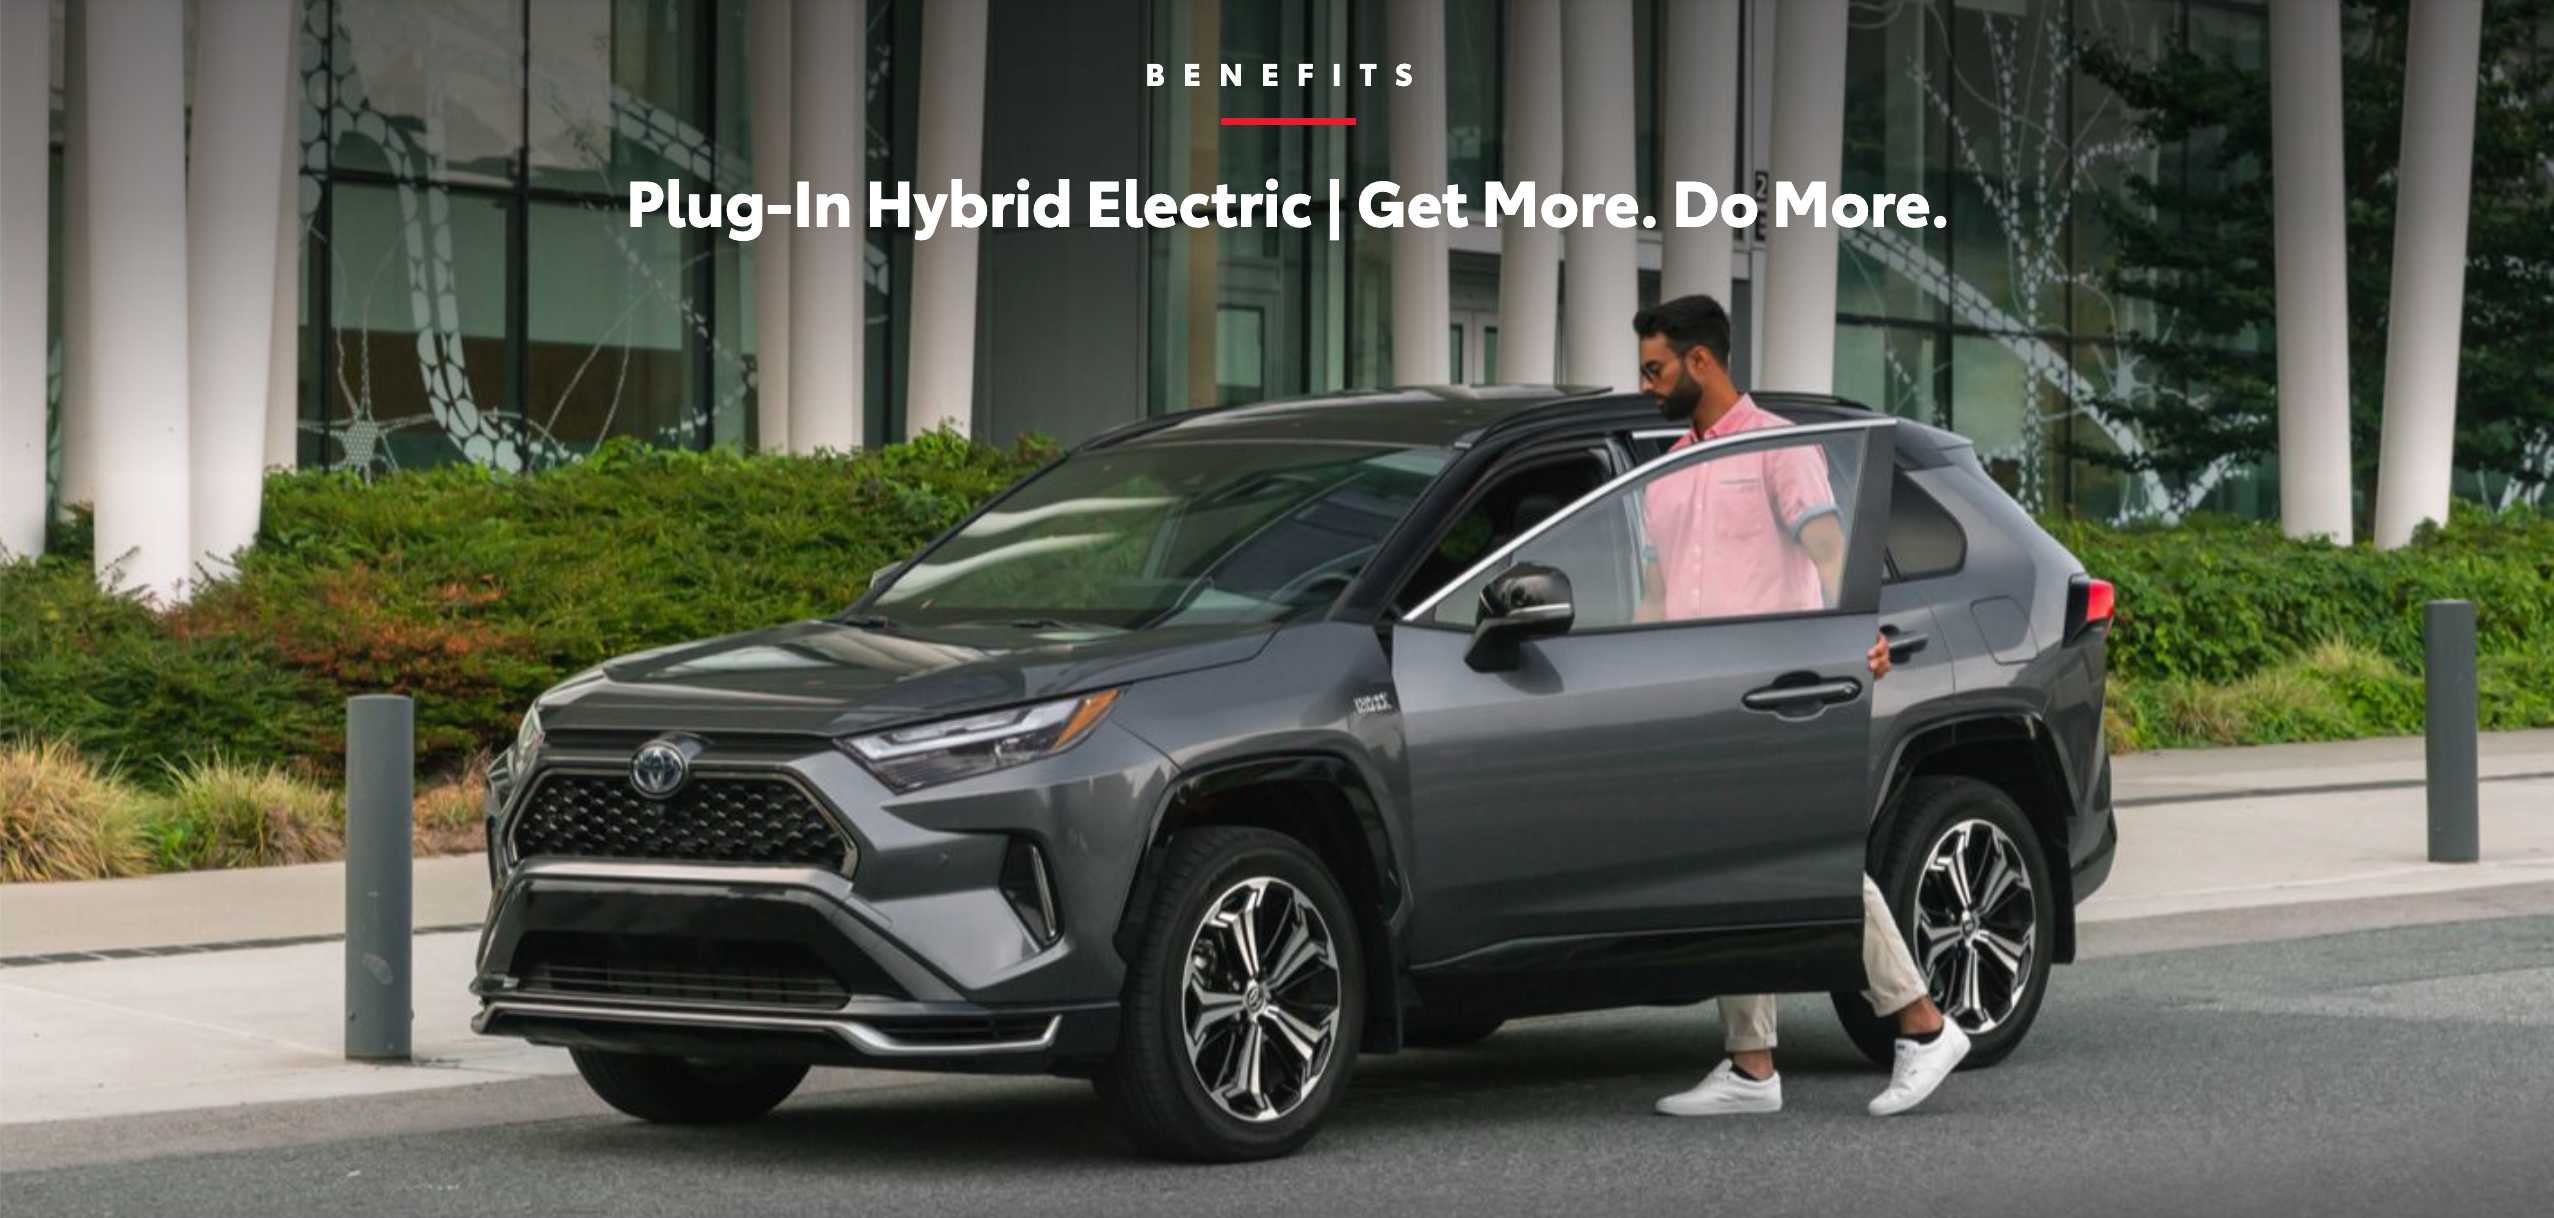 A man in a pink shirt getting into his plug-in hybrid electric Toyota.